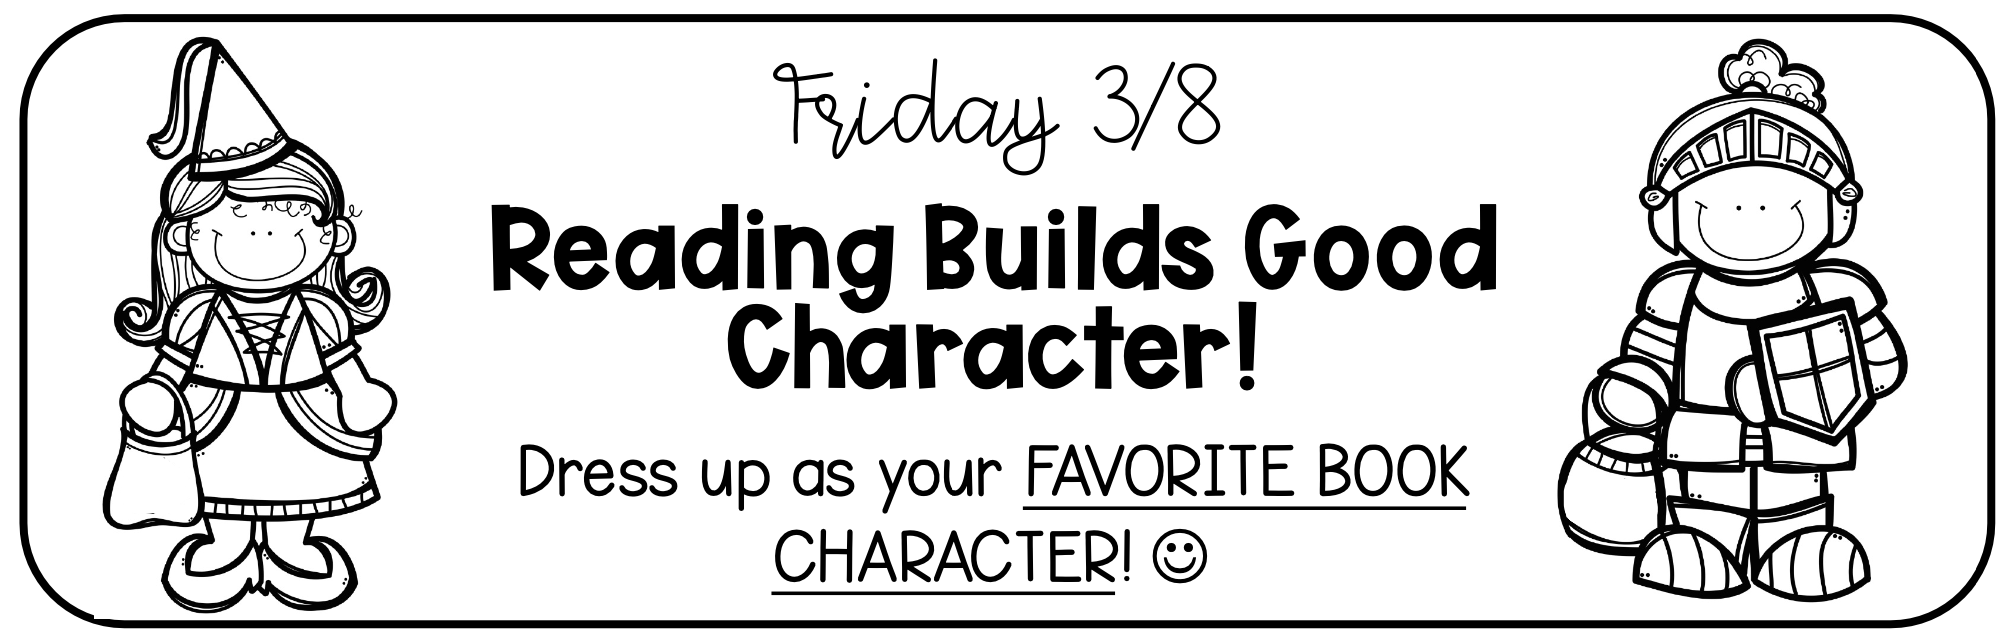 Reading Builds Good Character!